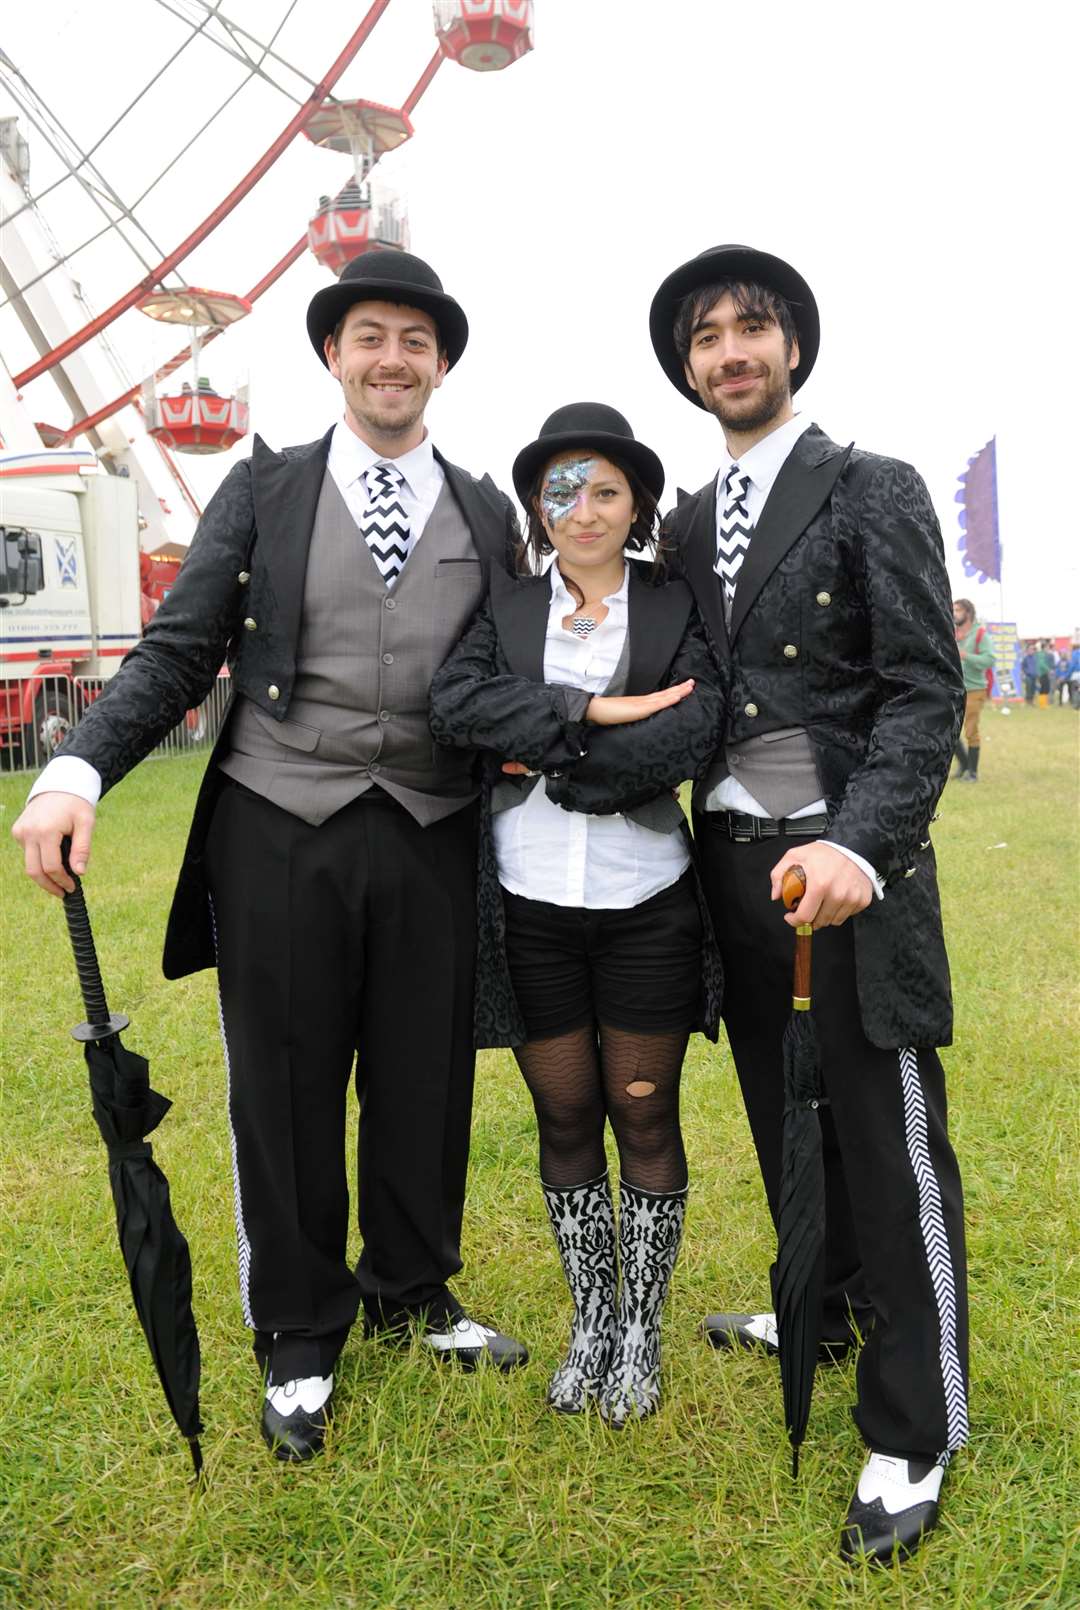 James Lawrence Bewley, Polly MacFarlane and Peter Antoniou promoting the glamorously decked-out Drambuie tent. Picture: Alison White.